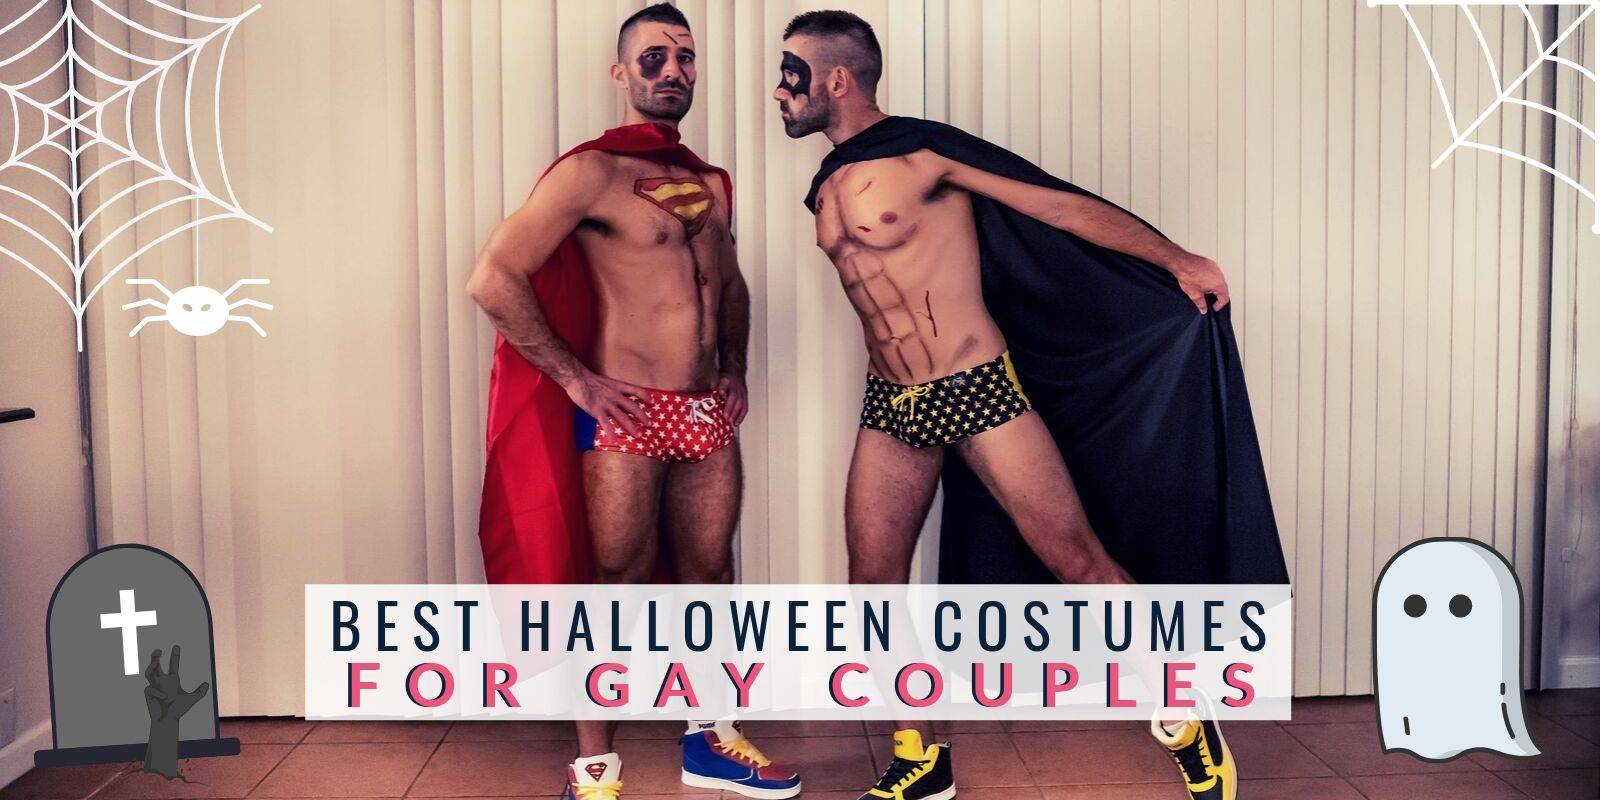 Our top 10 best gay couple Halloween costumes